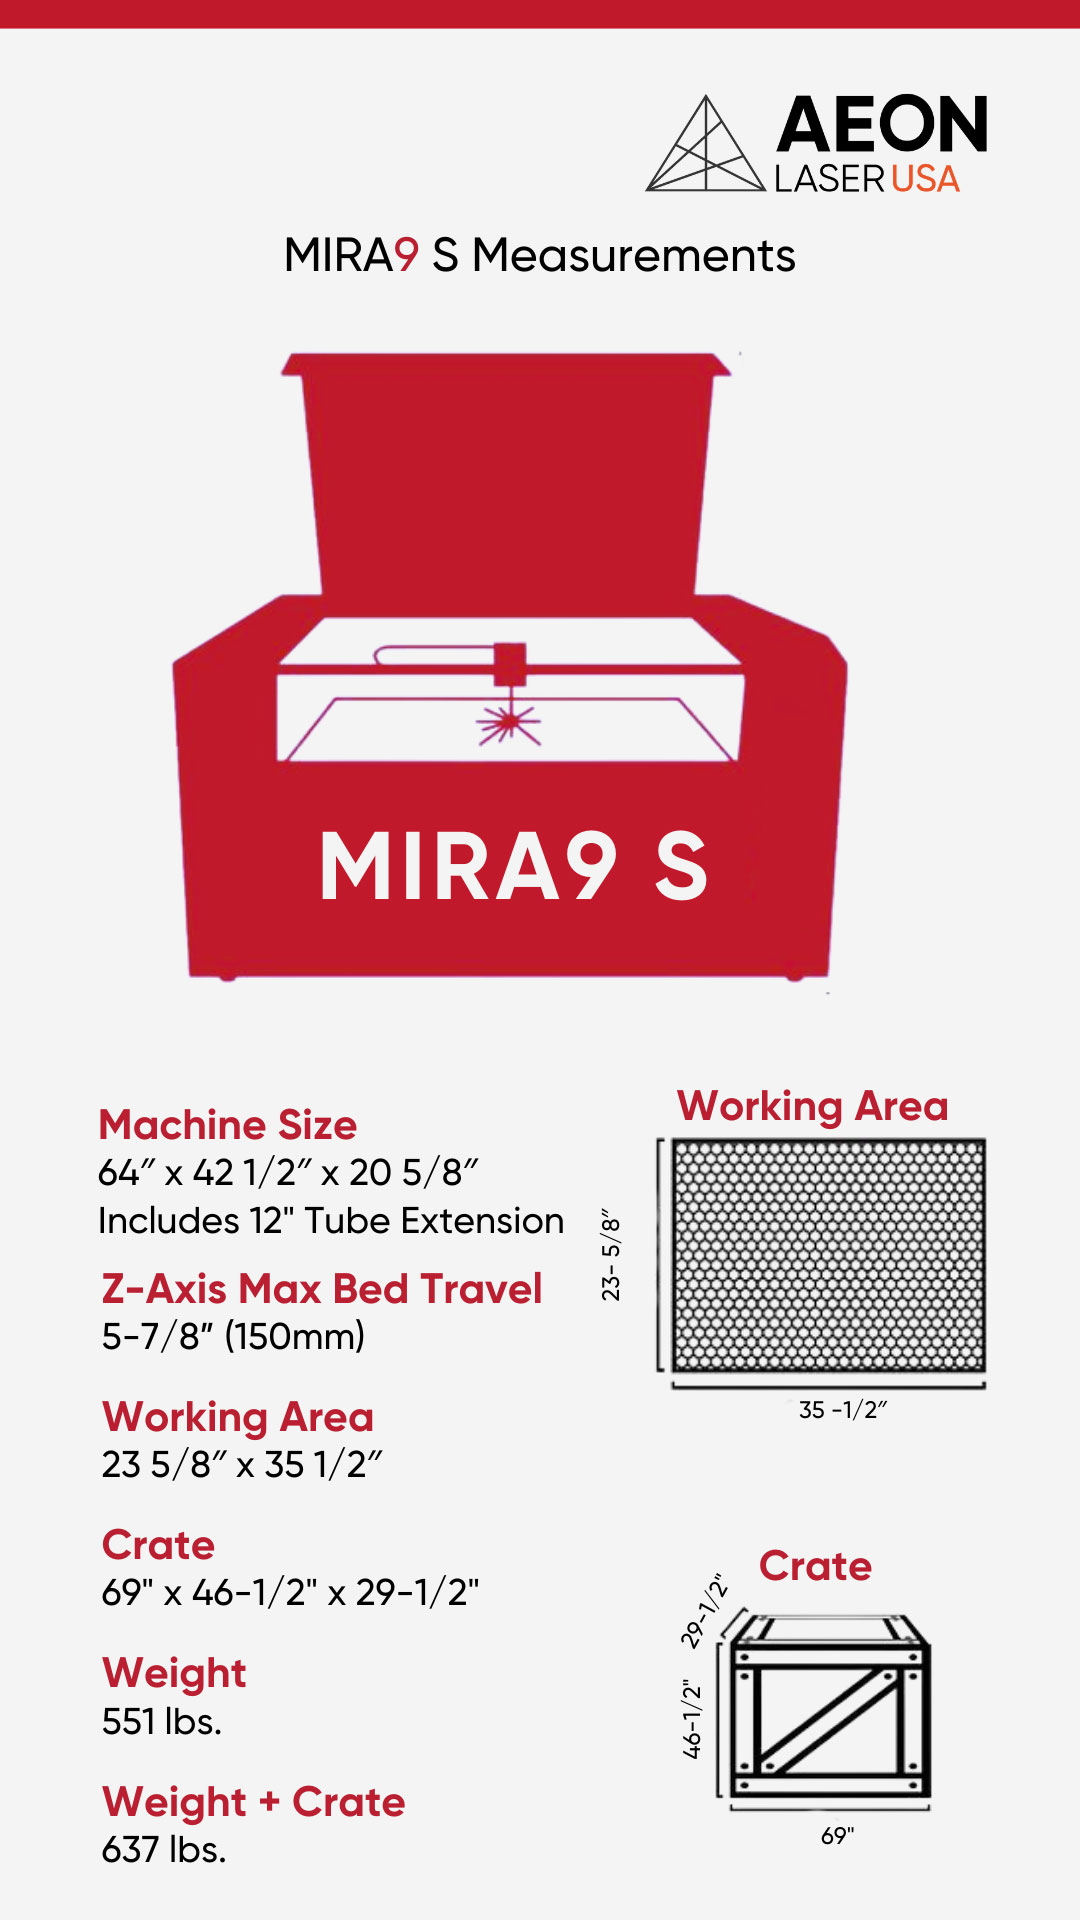 Graphic showing the dimensions of the MIRA 9 S laser, crate size, and weight info